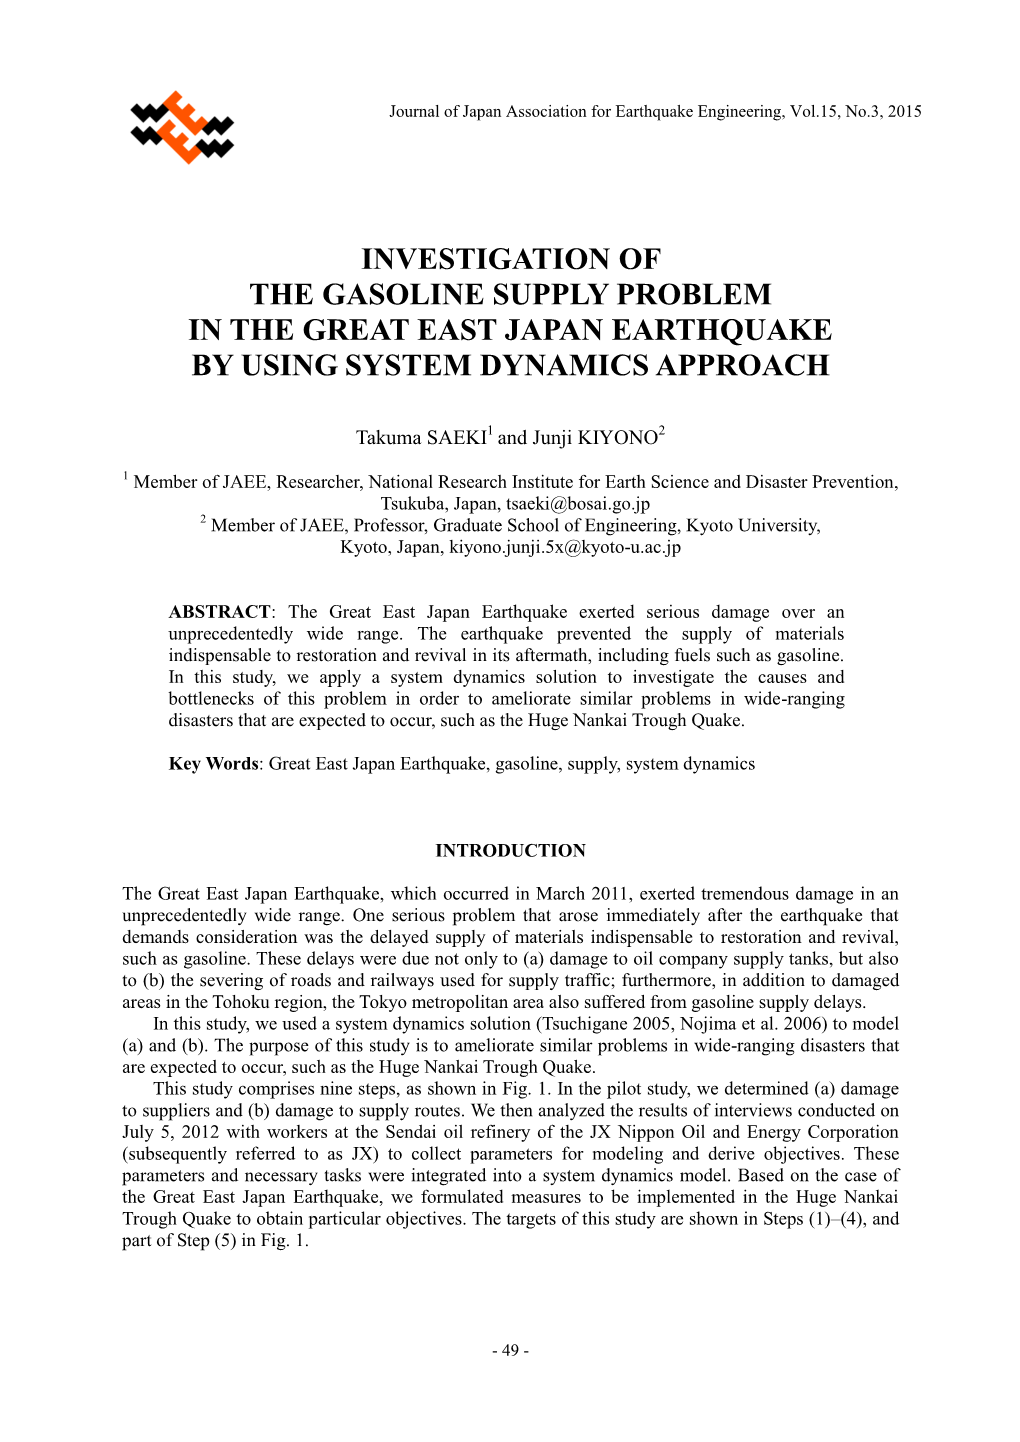 Investigation of the Gasoline Supply Problem in the Great East Japan Earthquake by Using System Dynamics Approach